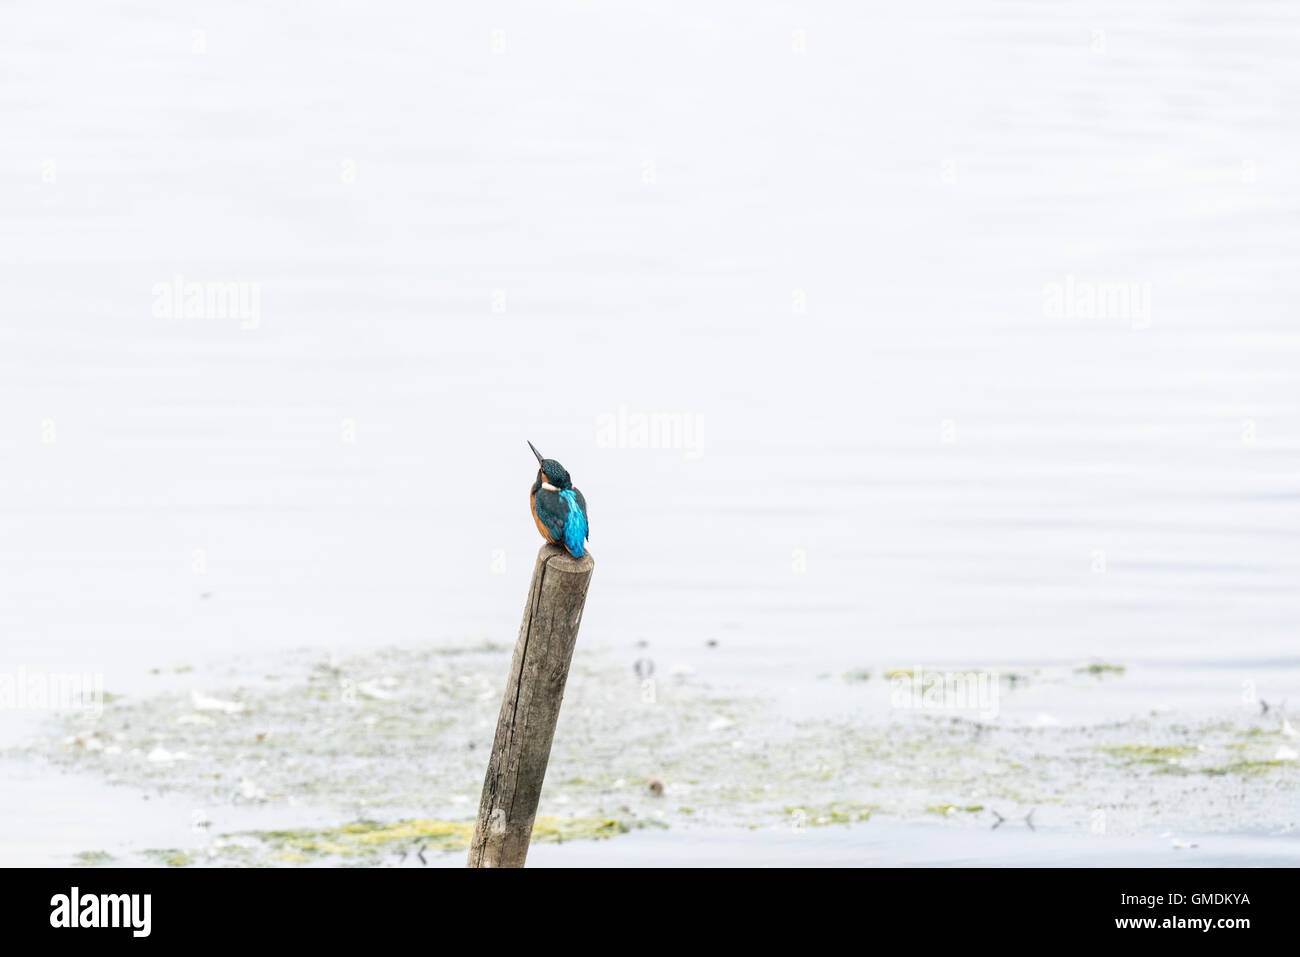 A perched Kingfisher looking around Stock Photo